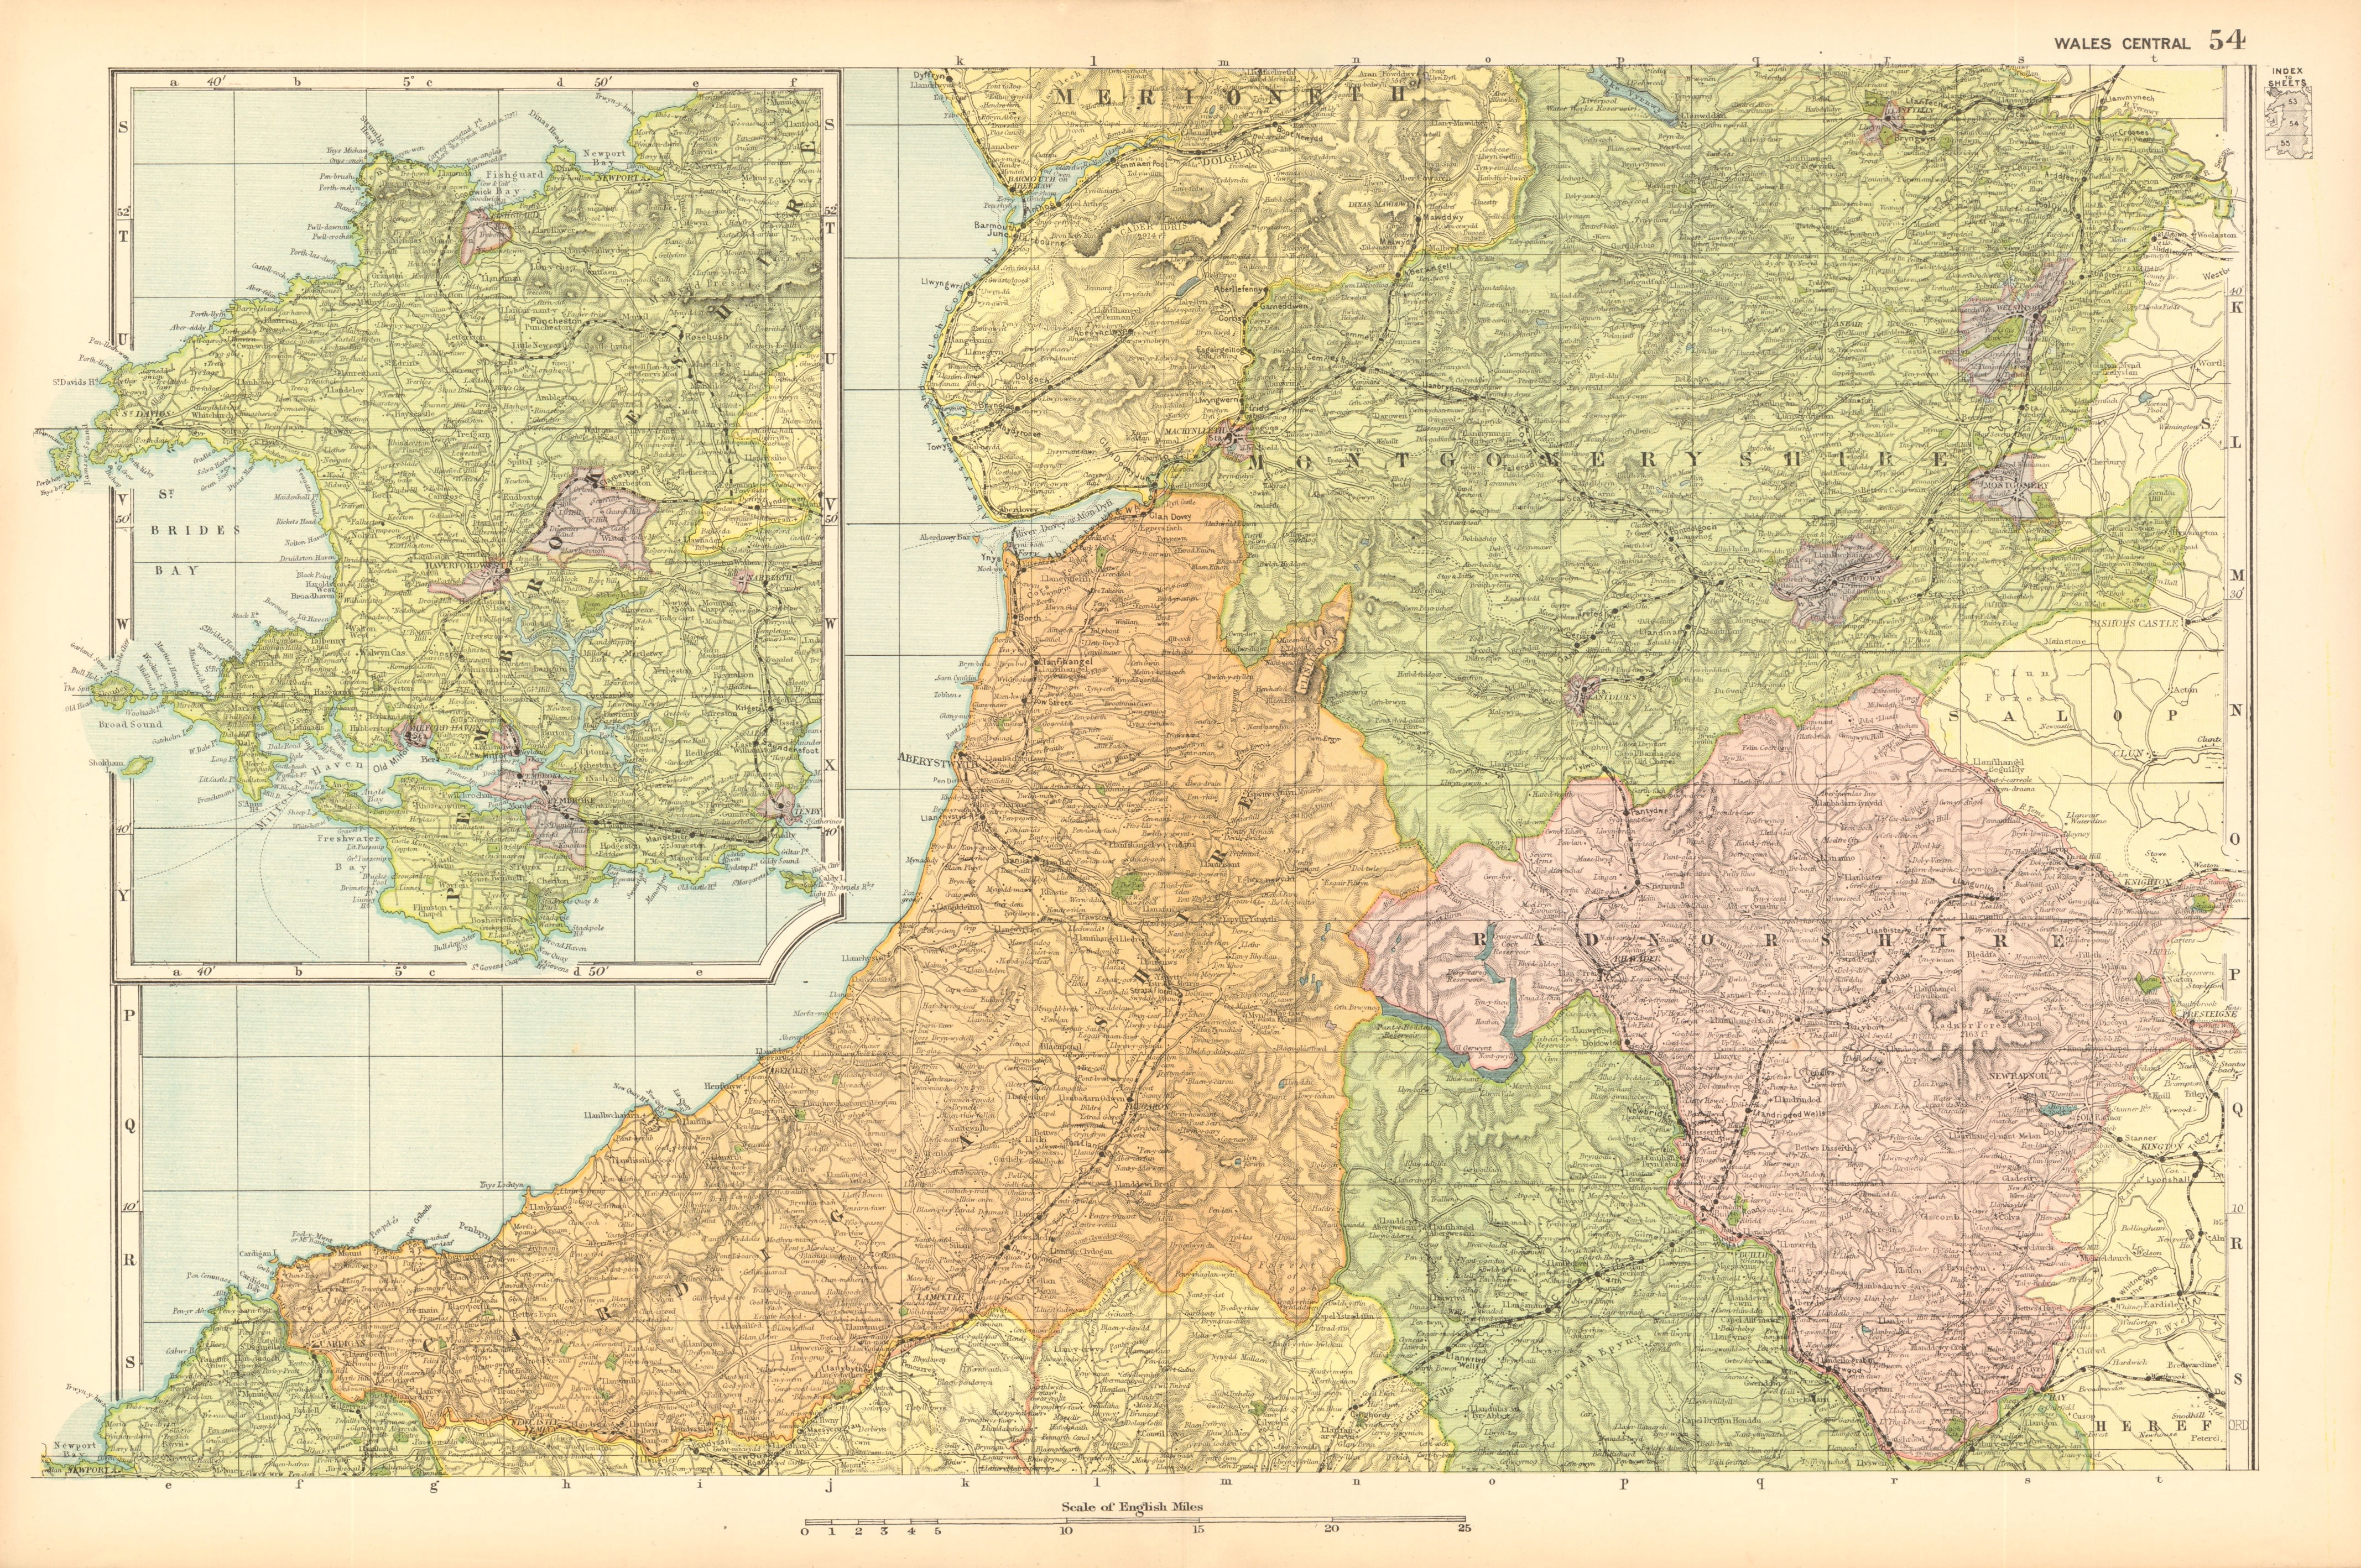 Associate Product CENTRAL WALES & PEMBROKESHIRE. Showing Parliamentary divisions. BACON 1904 map